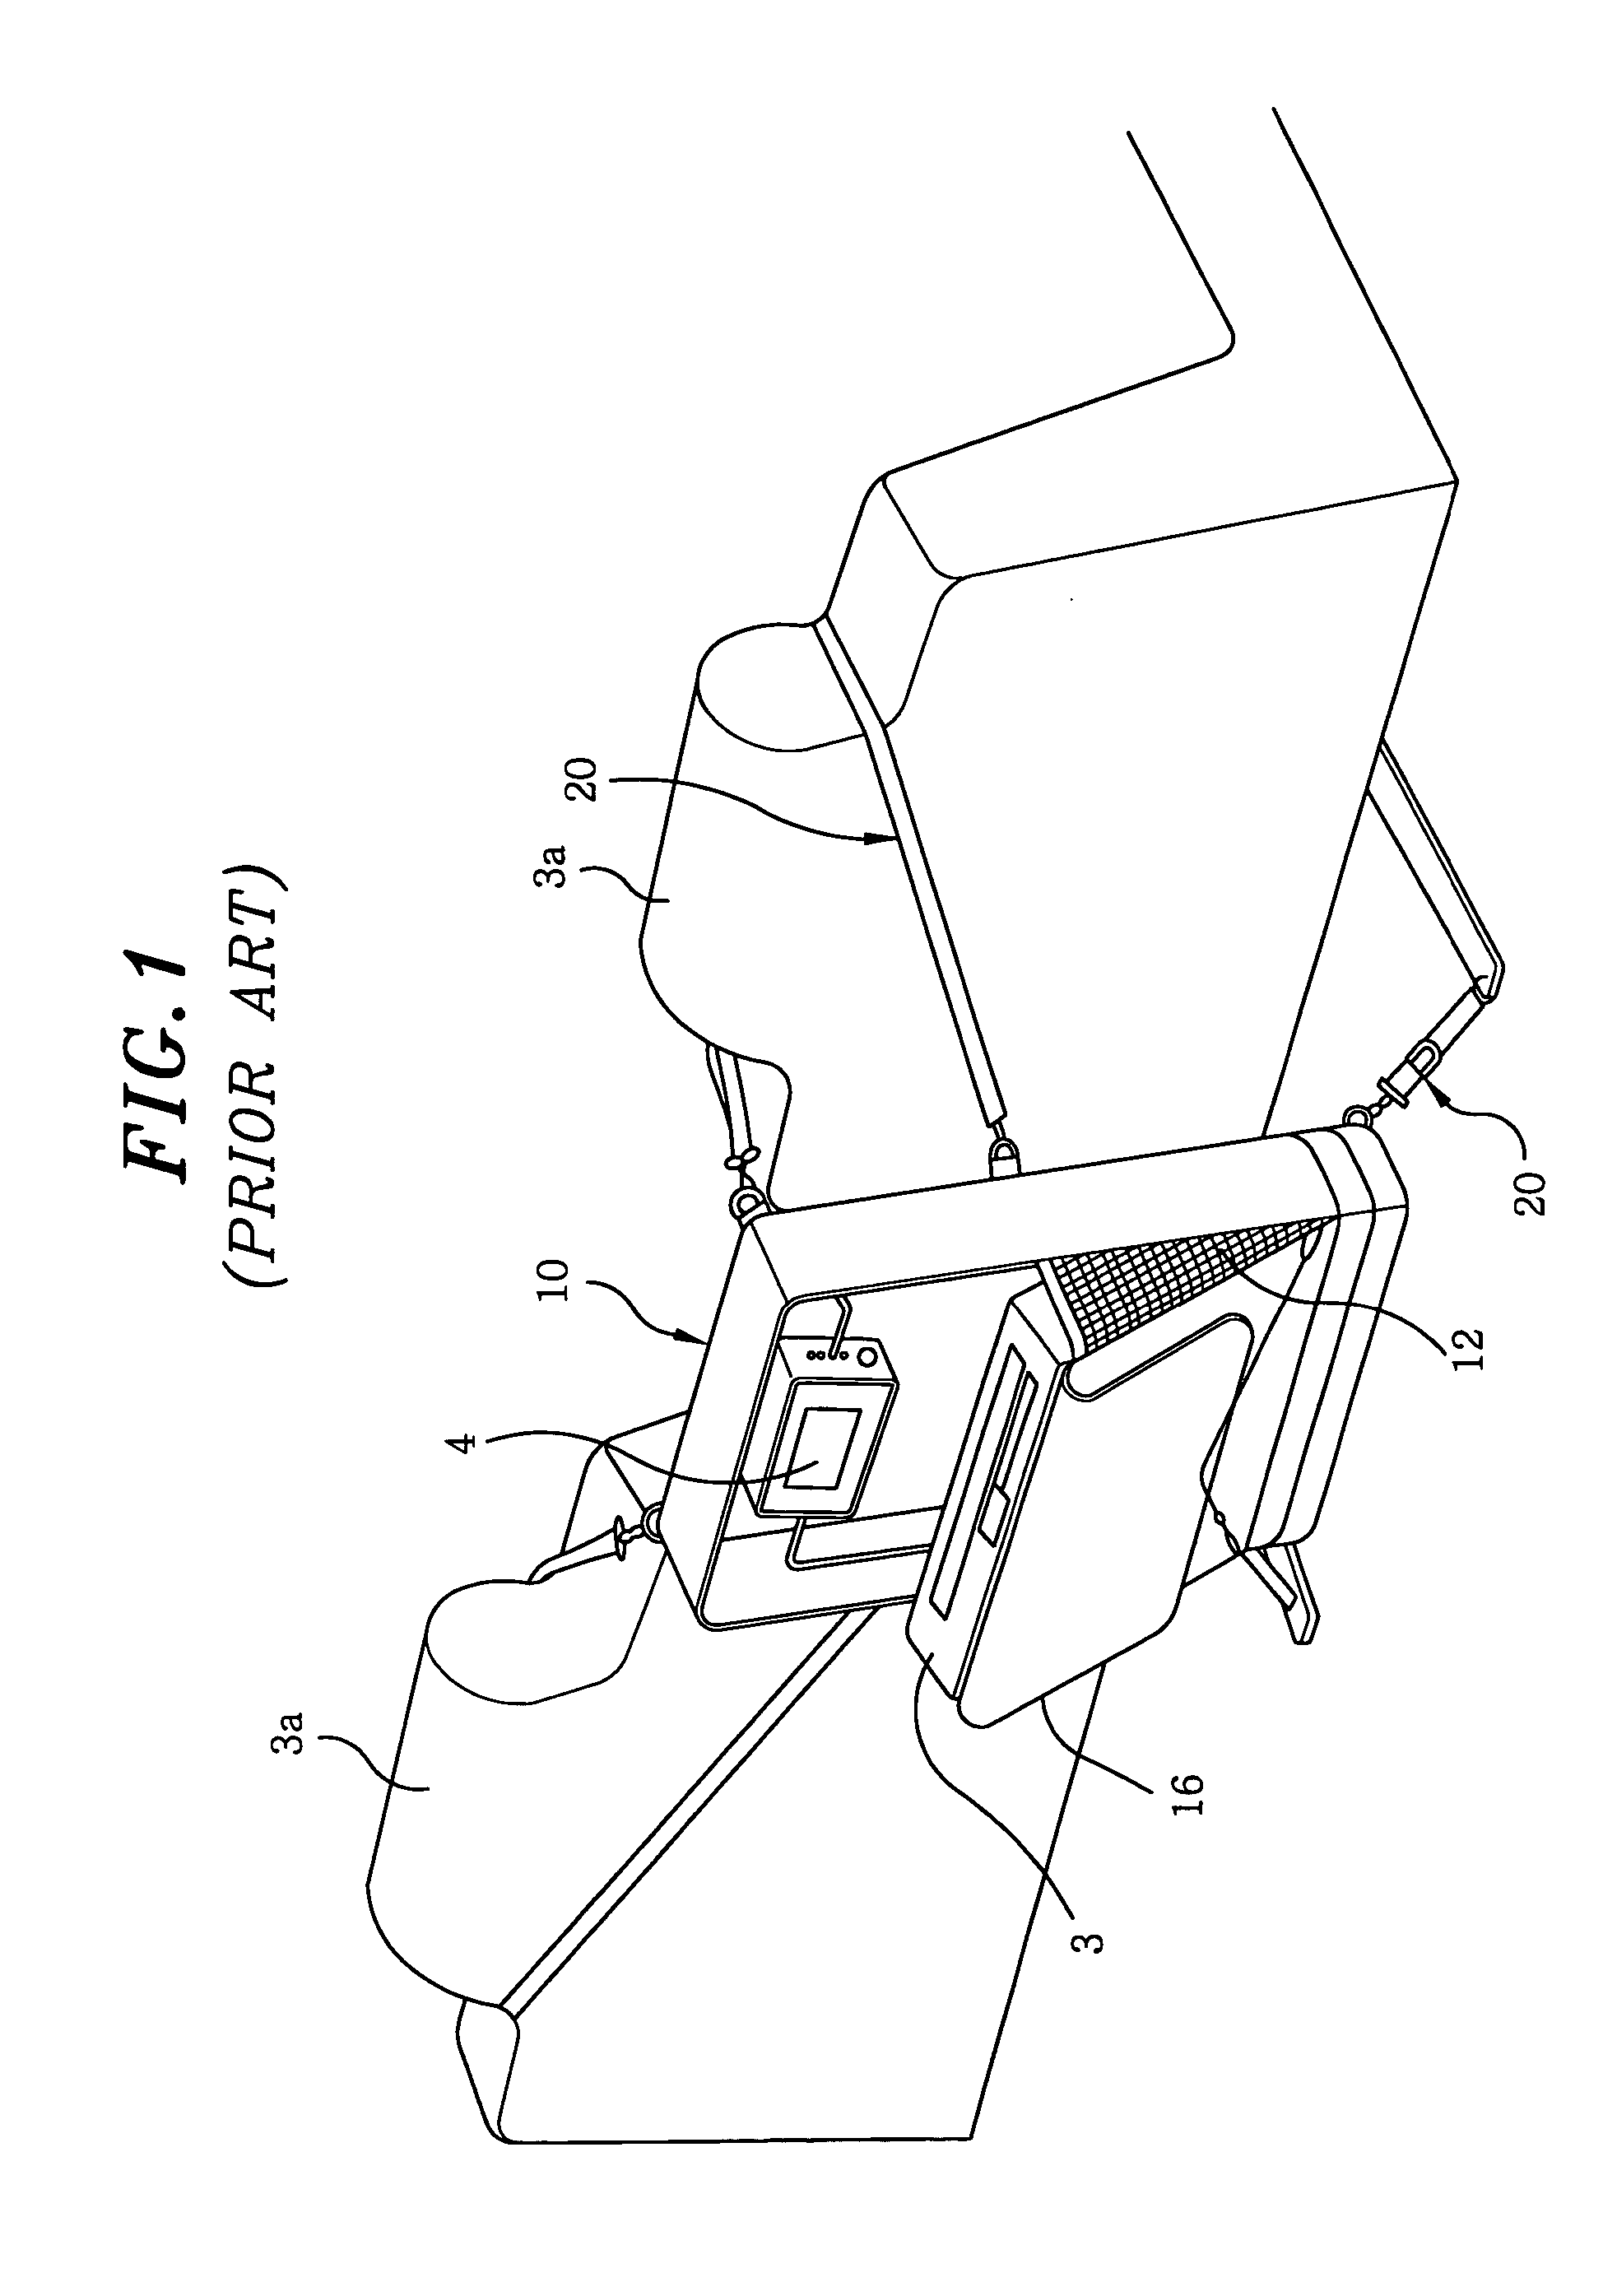 Case for carrying and mounting an image system in a car